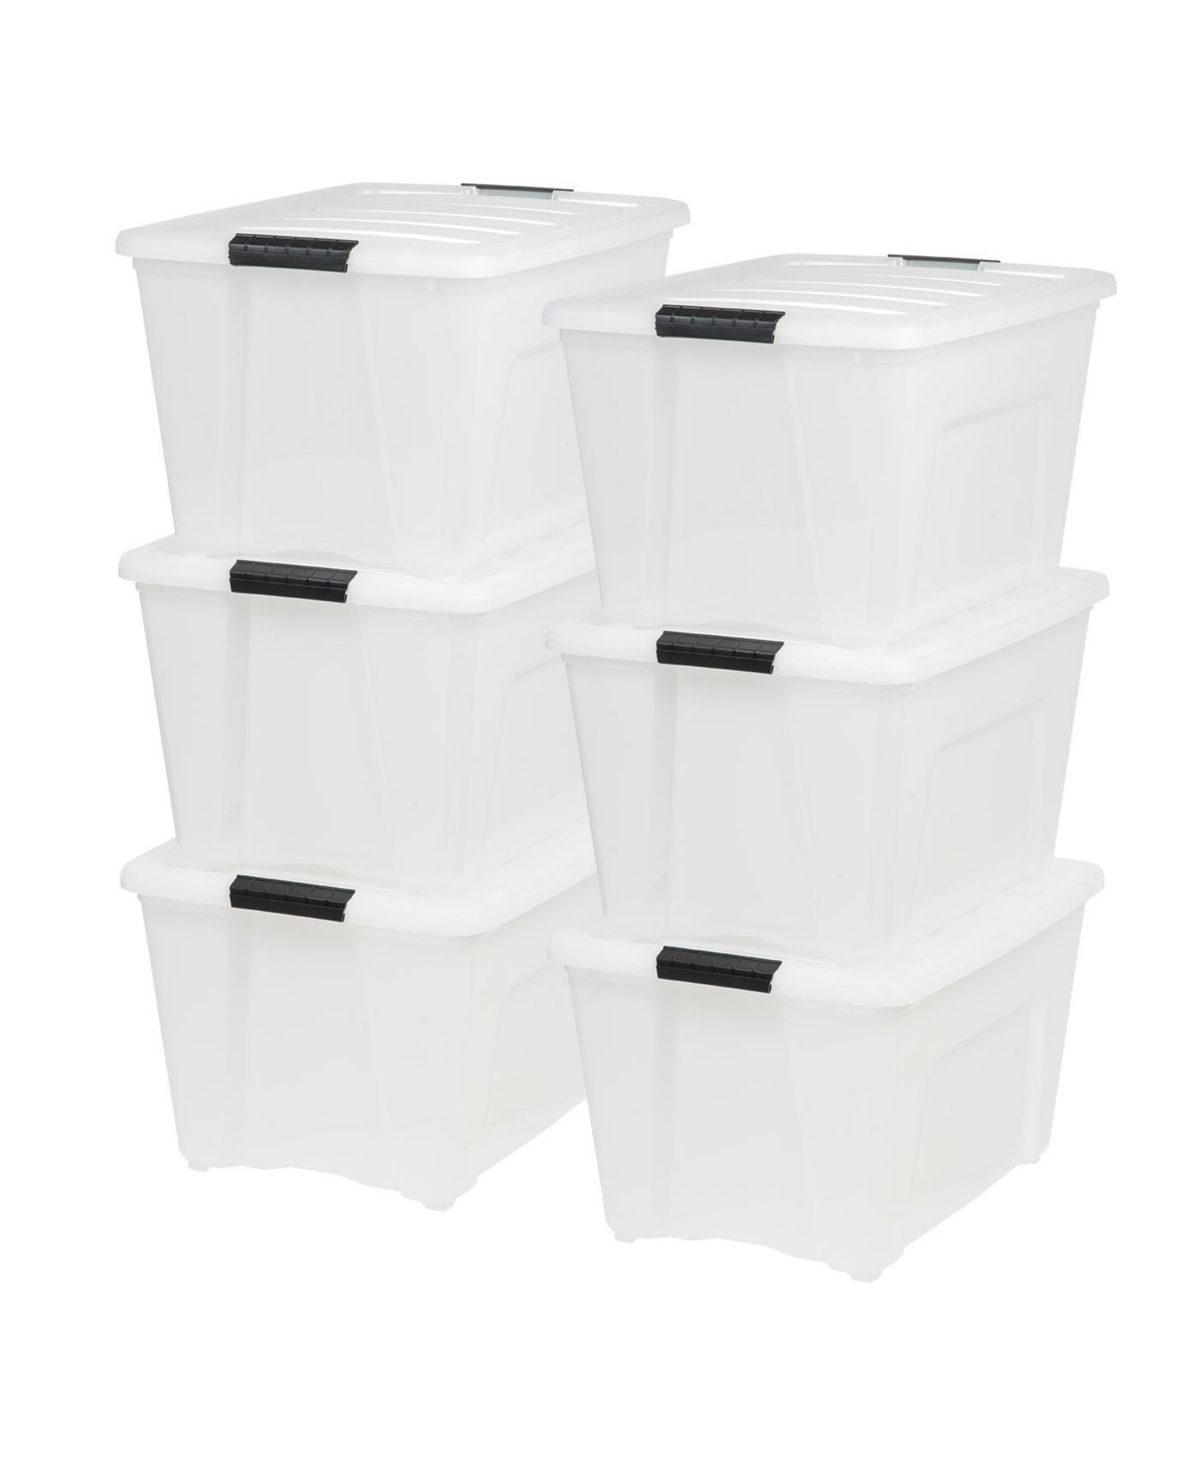 54 Qt Stackable Plastic Storage Bins with Lids, 6 Pack - Bpa-Free, Made in Usa - Discreet Organizing Solution, Latches, Durable Nestable Cont